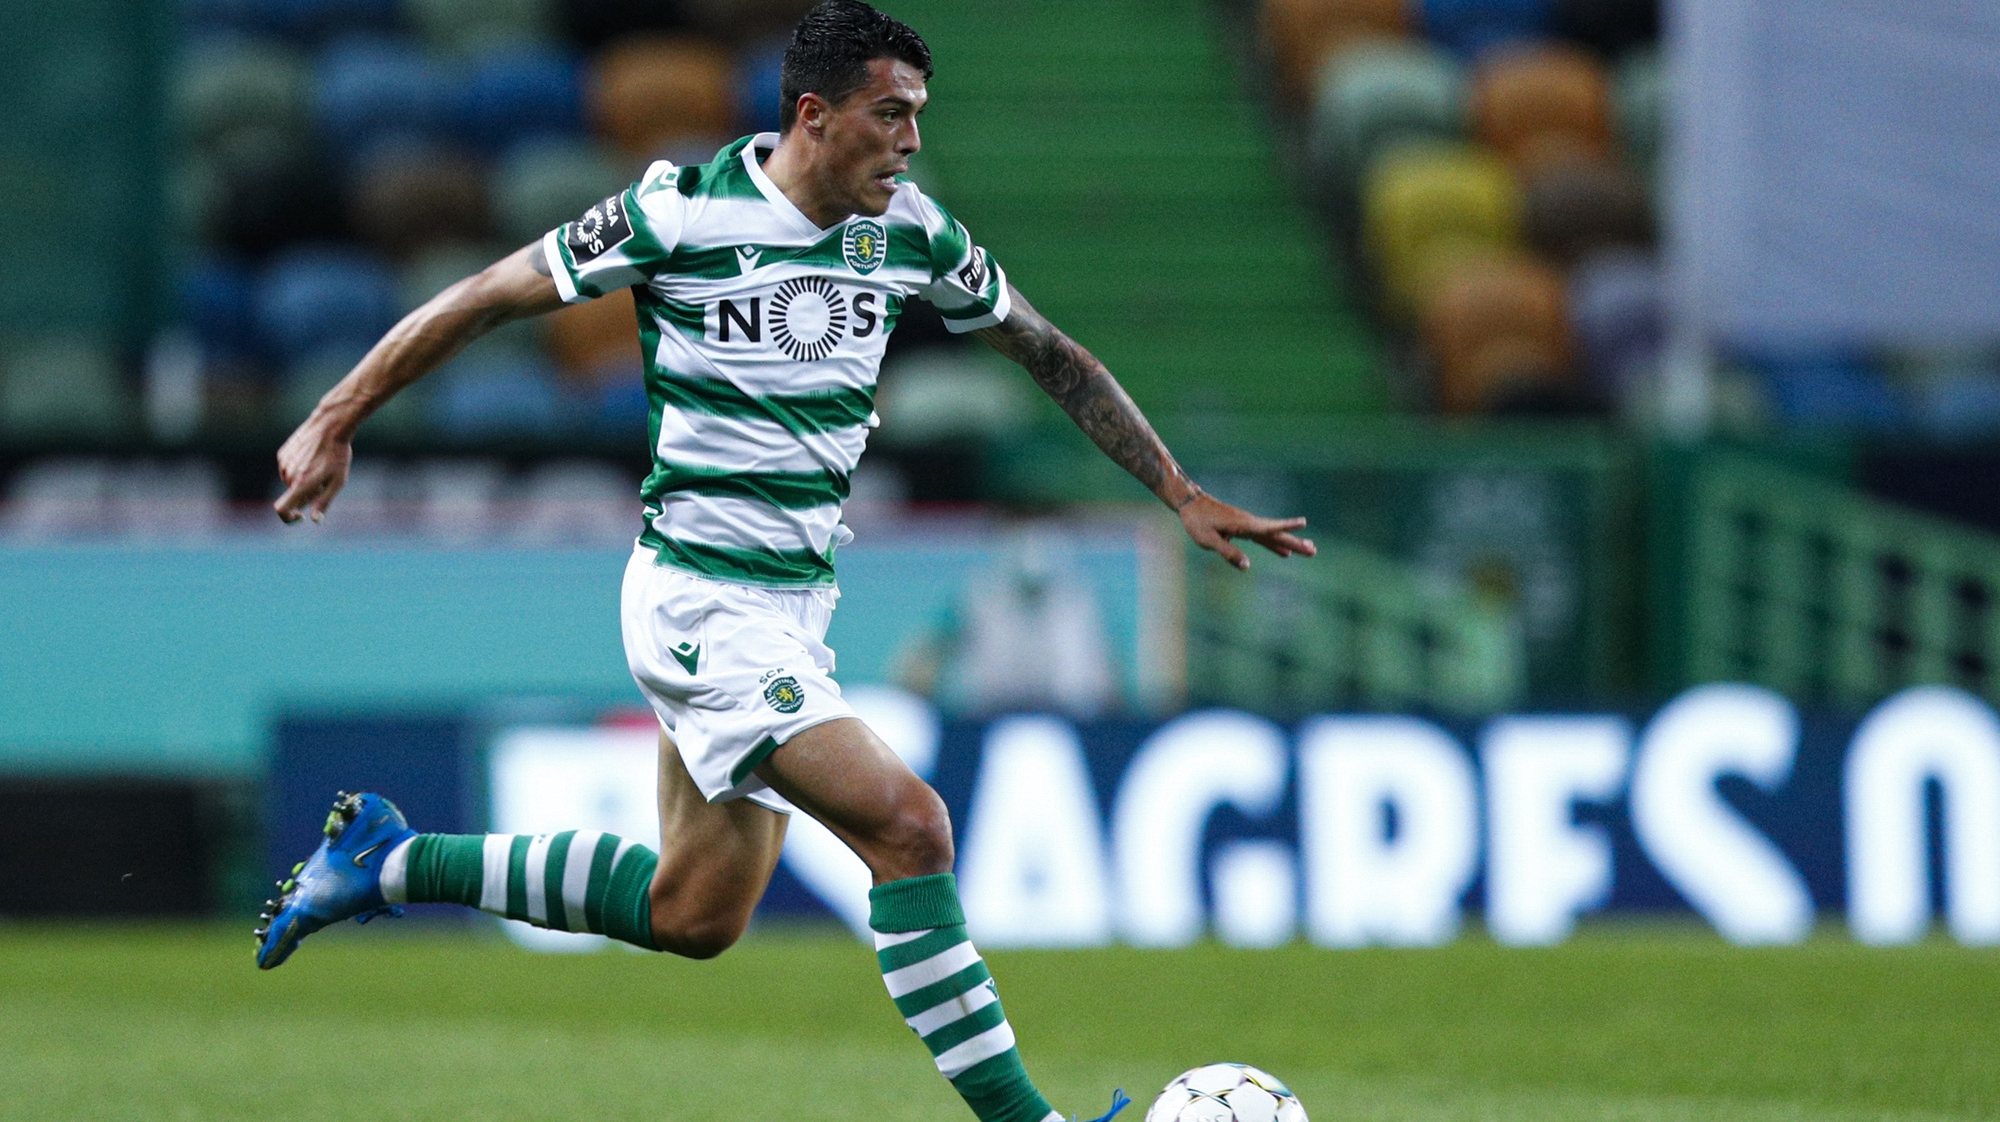 Sporting´s player  Pedro Porro, in action during their Portuguese First League soccer match held at Alvalade Stadium in Lisbon, Portugal, 21st April 2021.  ANTONIO COTRIM/LUSA